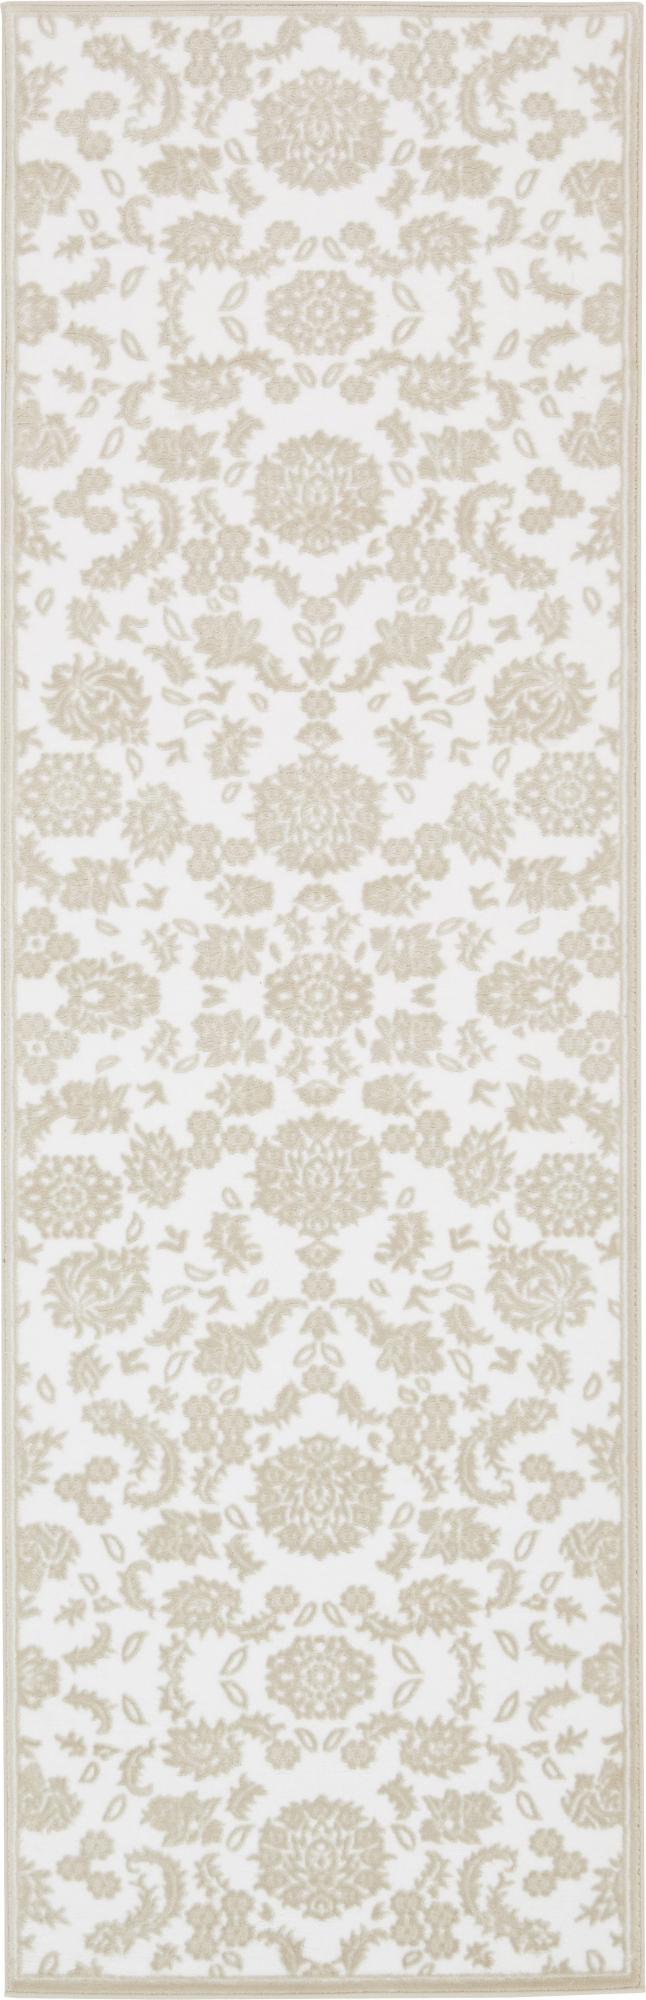 rugpal keystone country & floral area rug collection